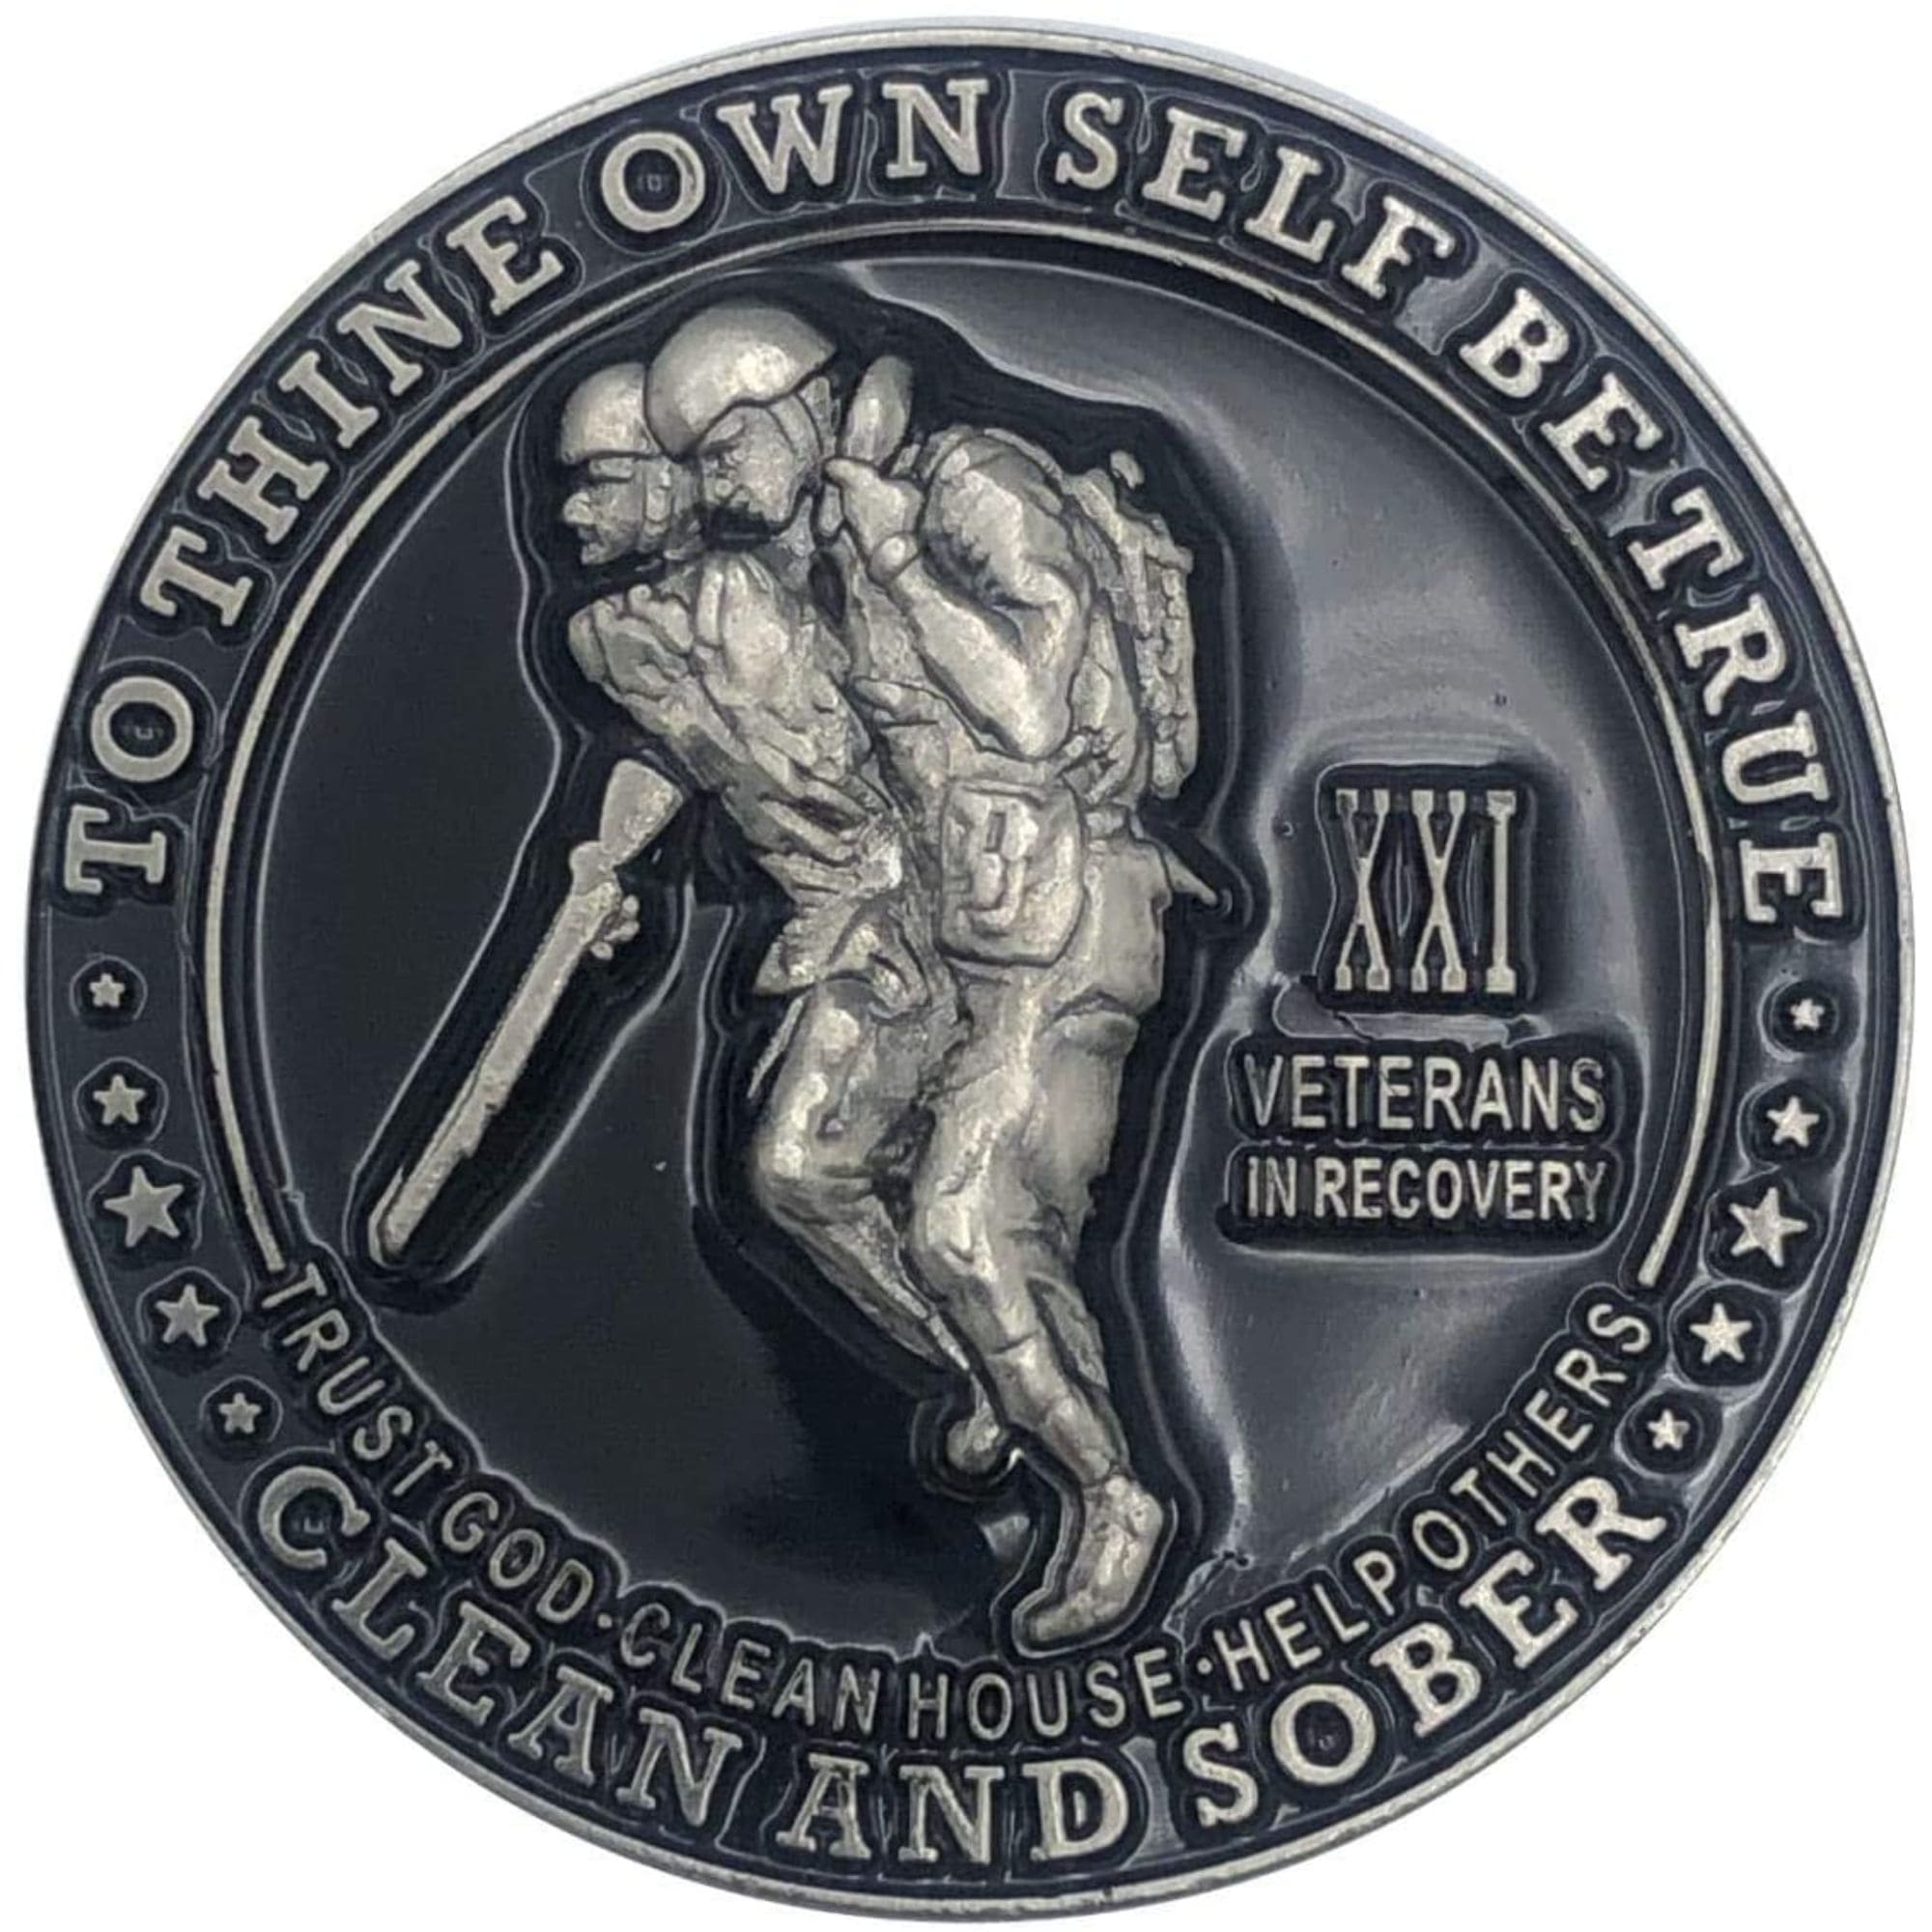 Veterans In Recovery 1-60yrs